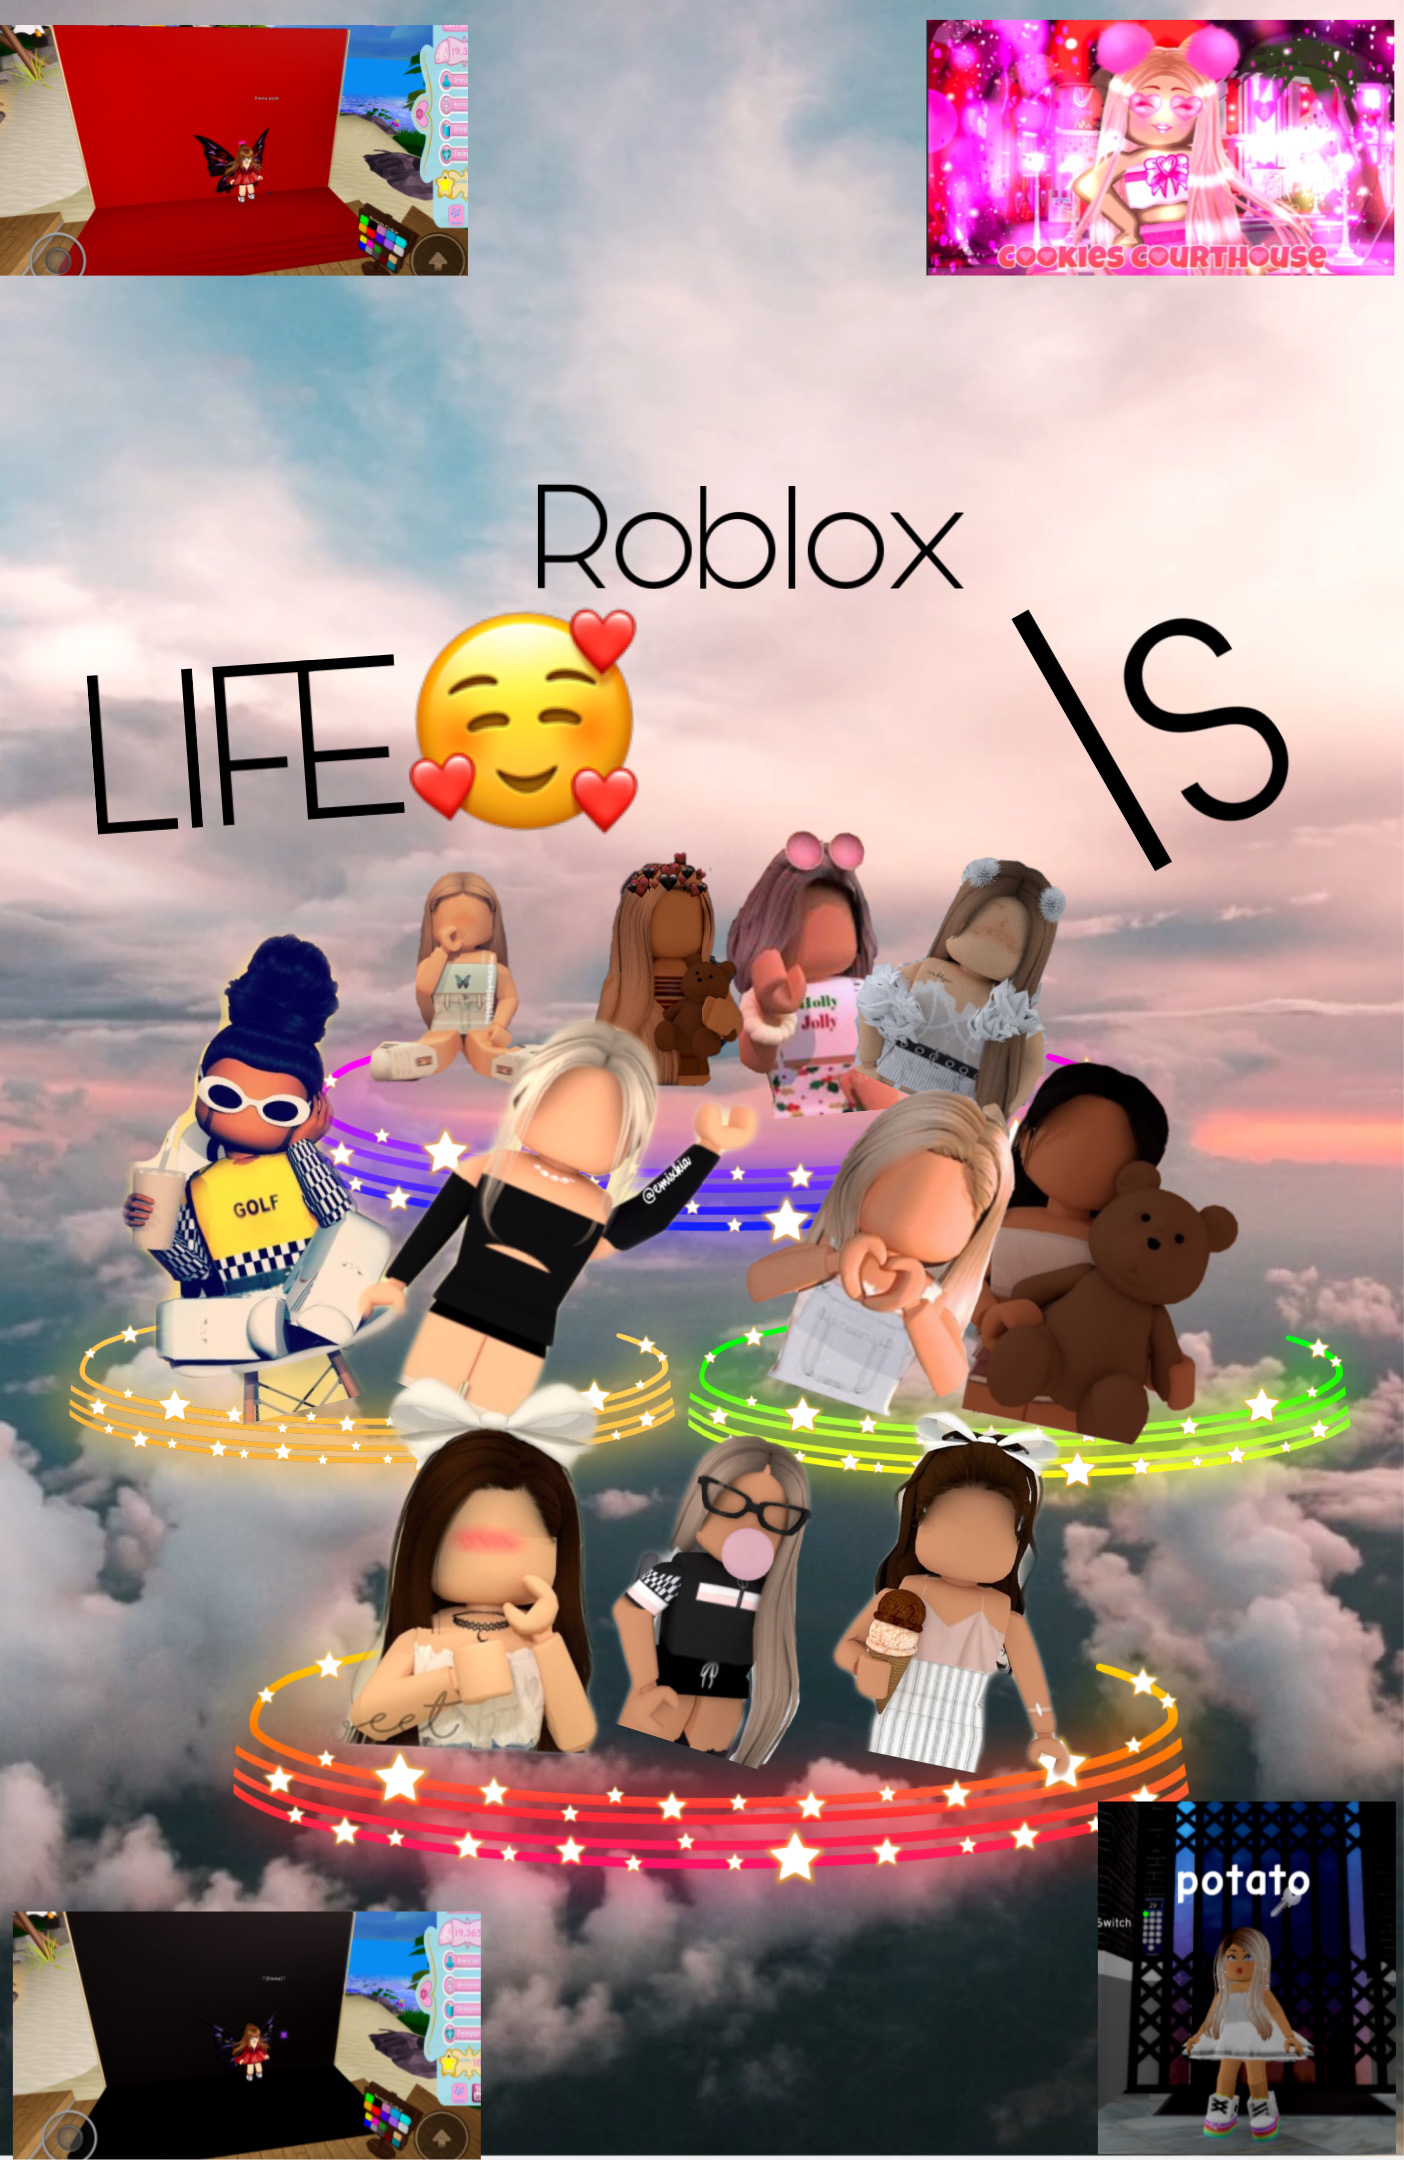 Roblox Image By Ur Local Hottie - robloxtoys instagram photo and video on instagram pikdo